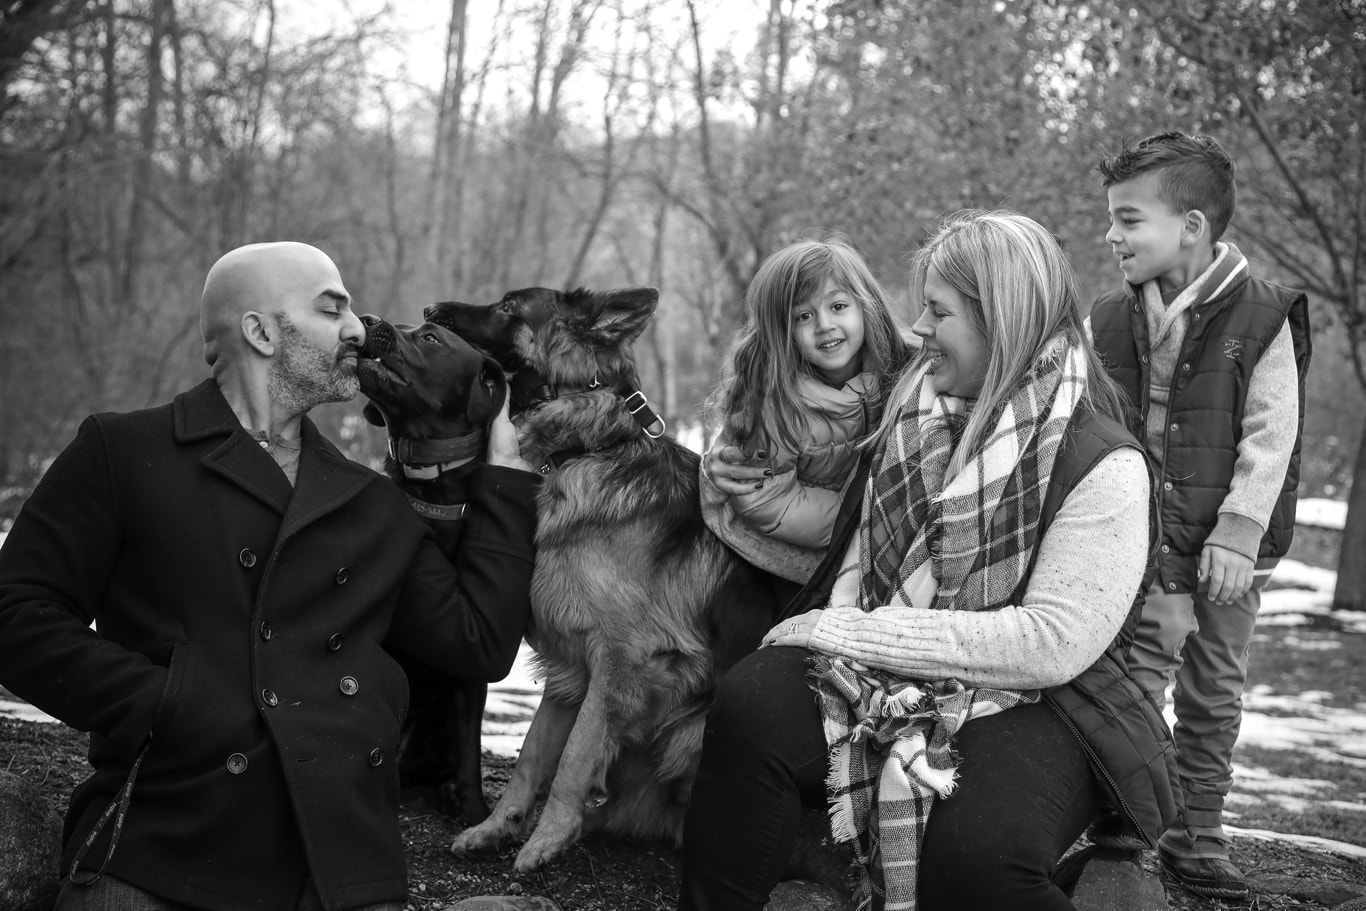 Amit, his wife, kids, and two dogs